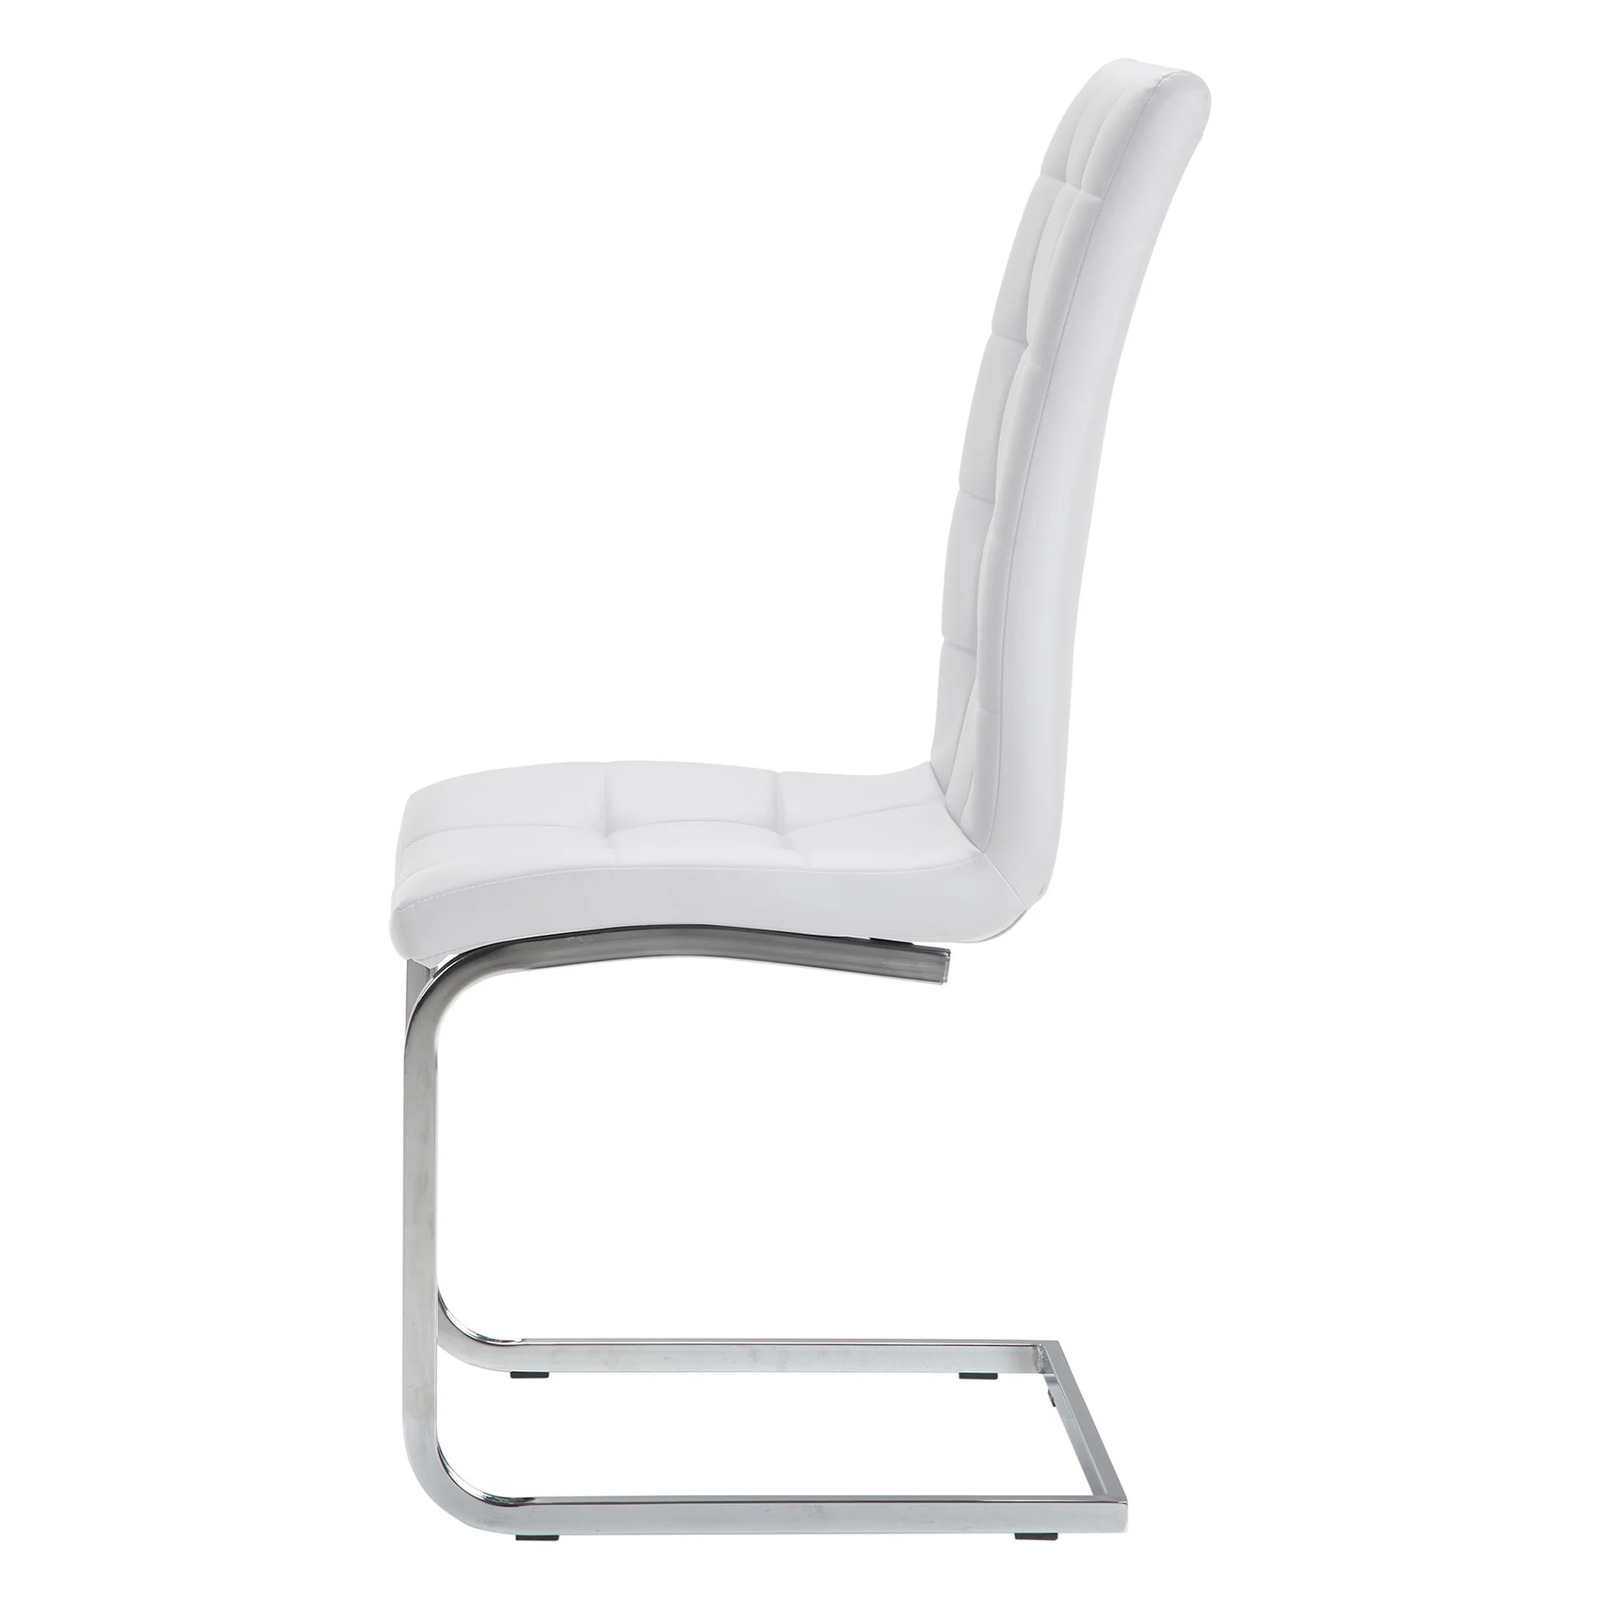 Luna Faux Leather Dining Chairs, White Set of 2